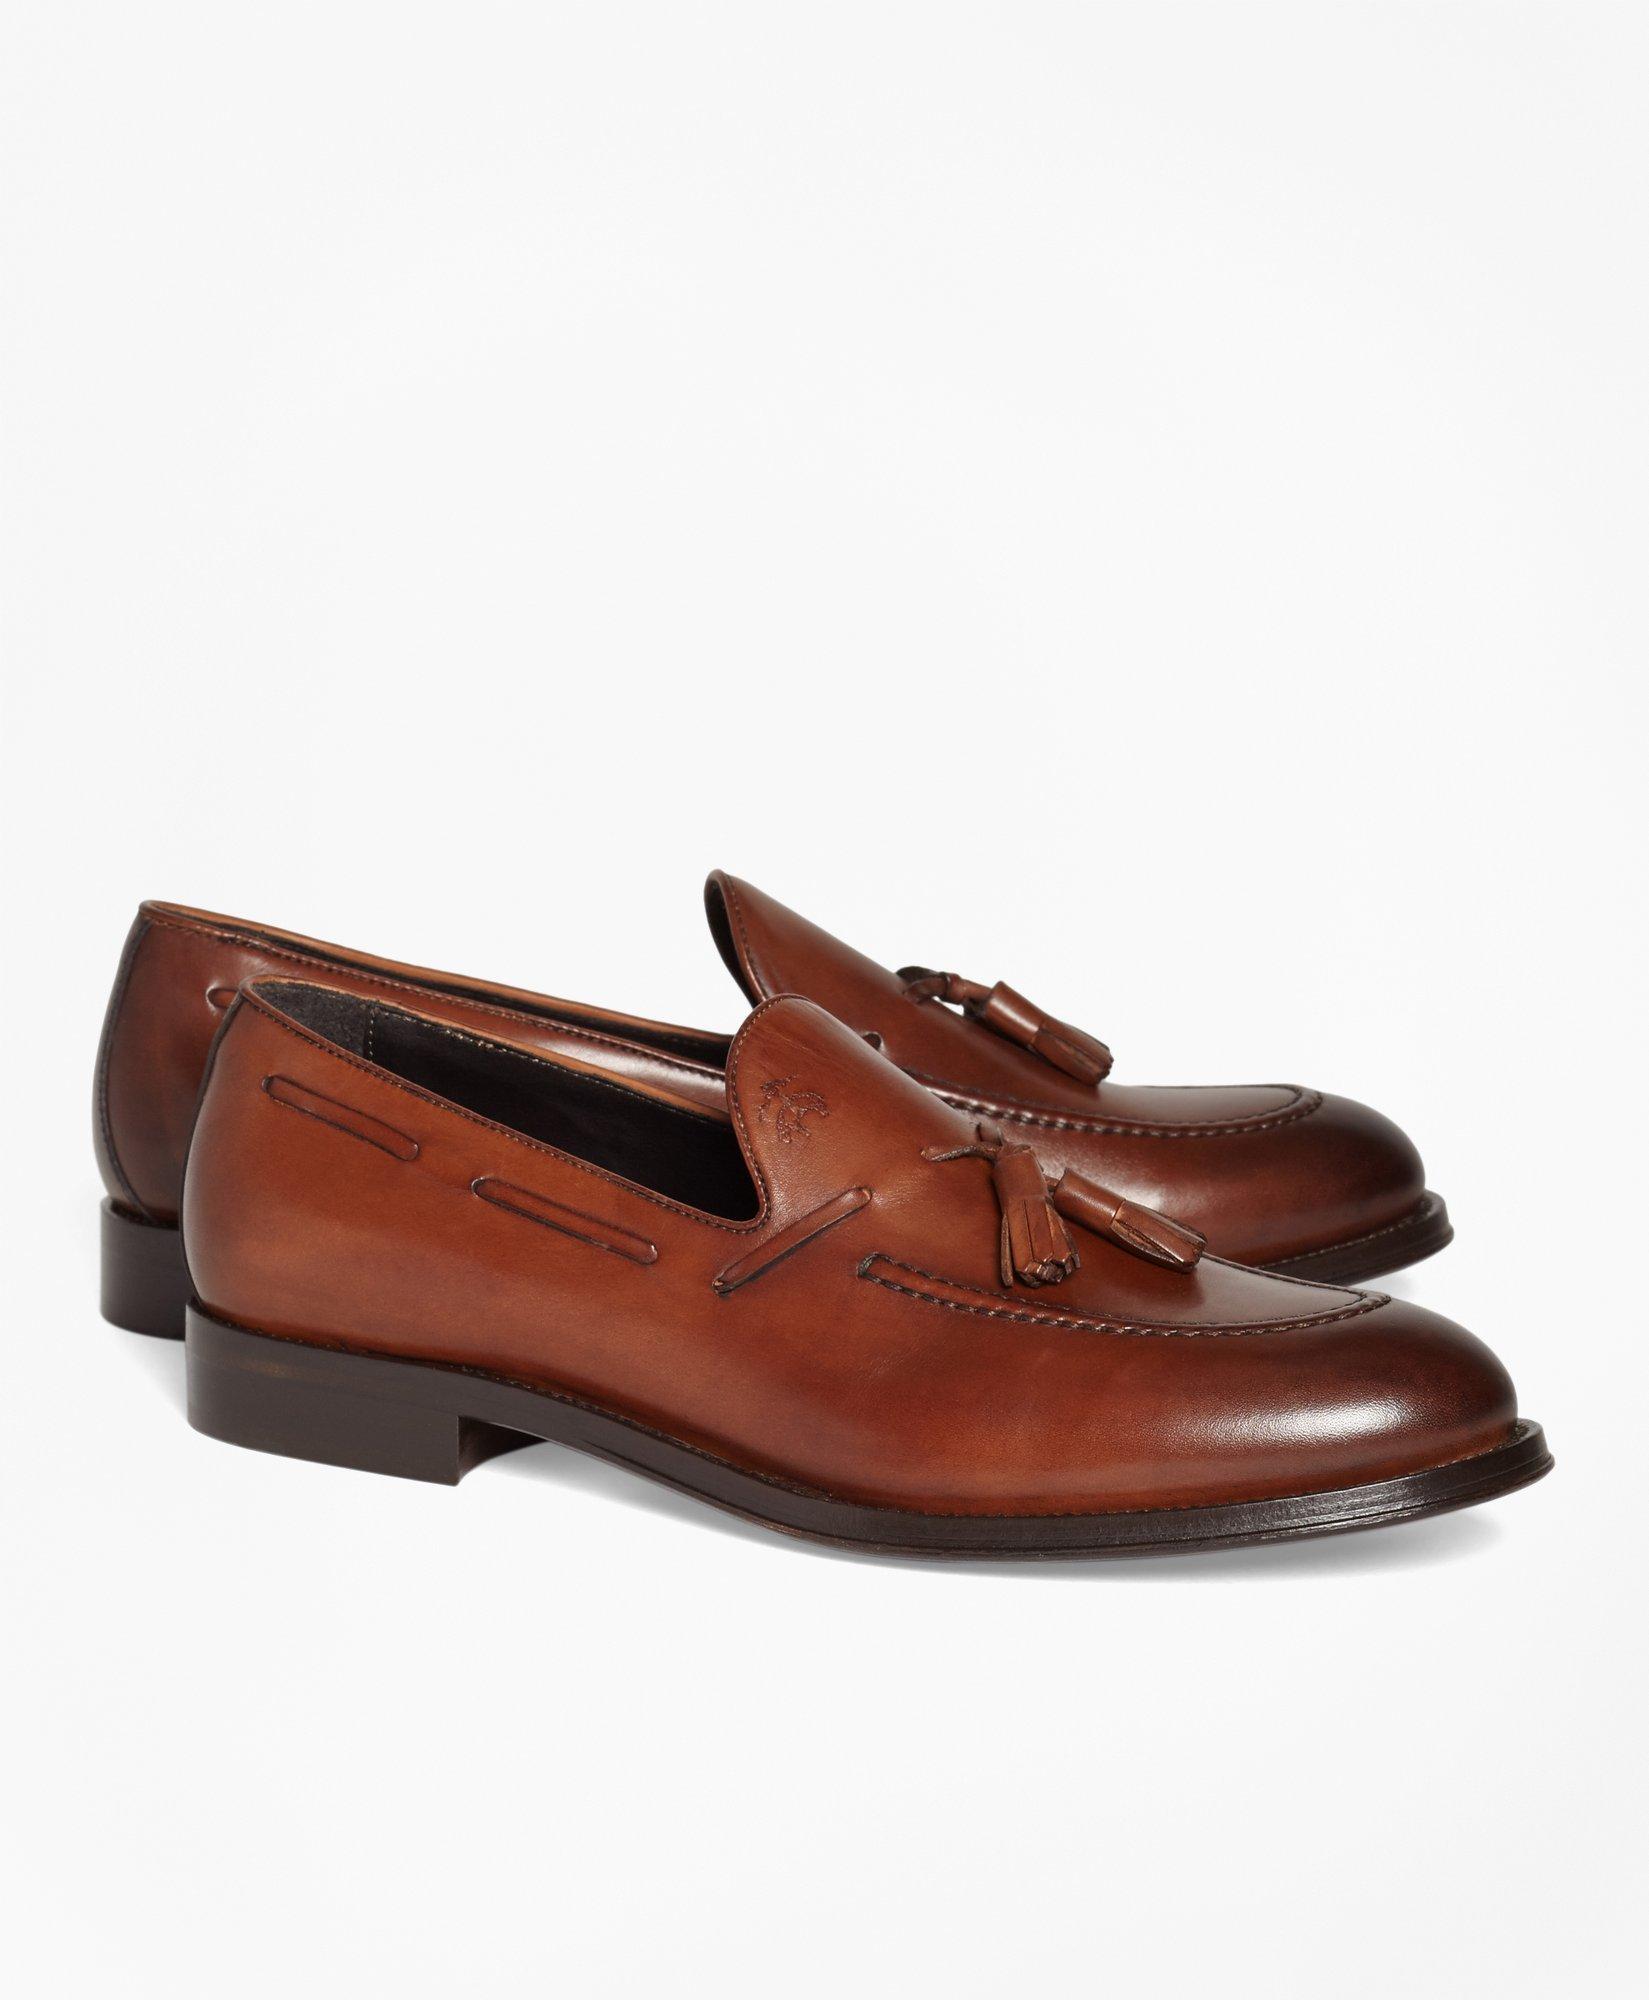 Brooks Brothers 1818 Footwear Leather Tassel Loafers | Cognac | Size 7 D